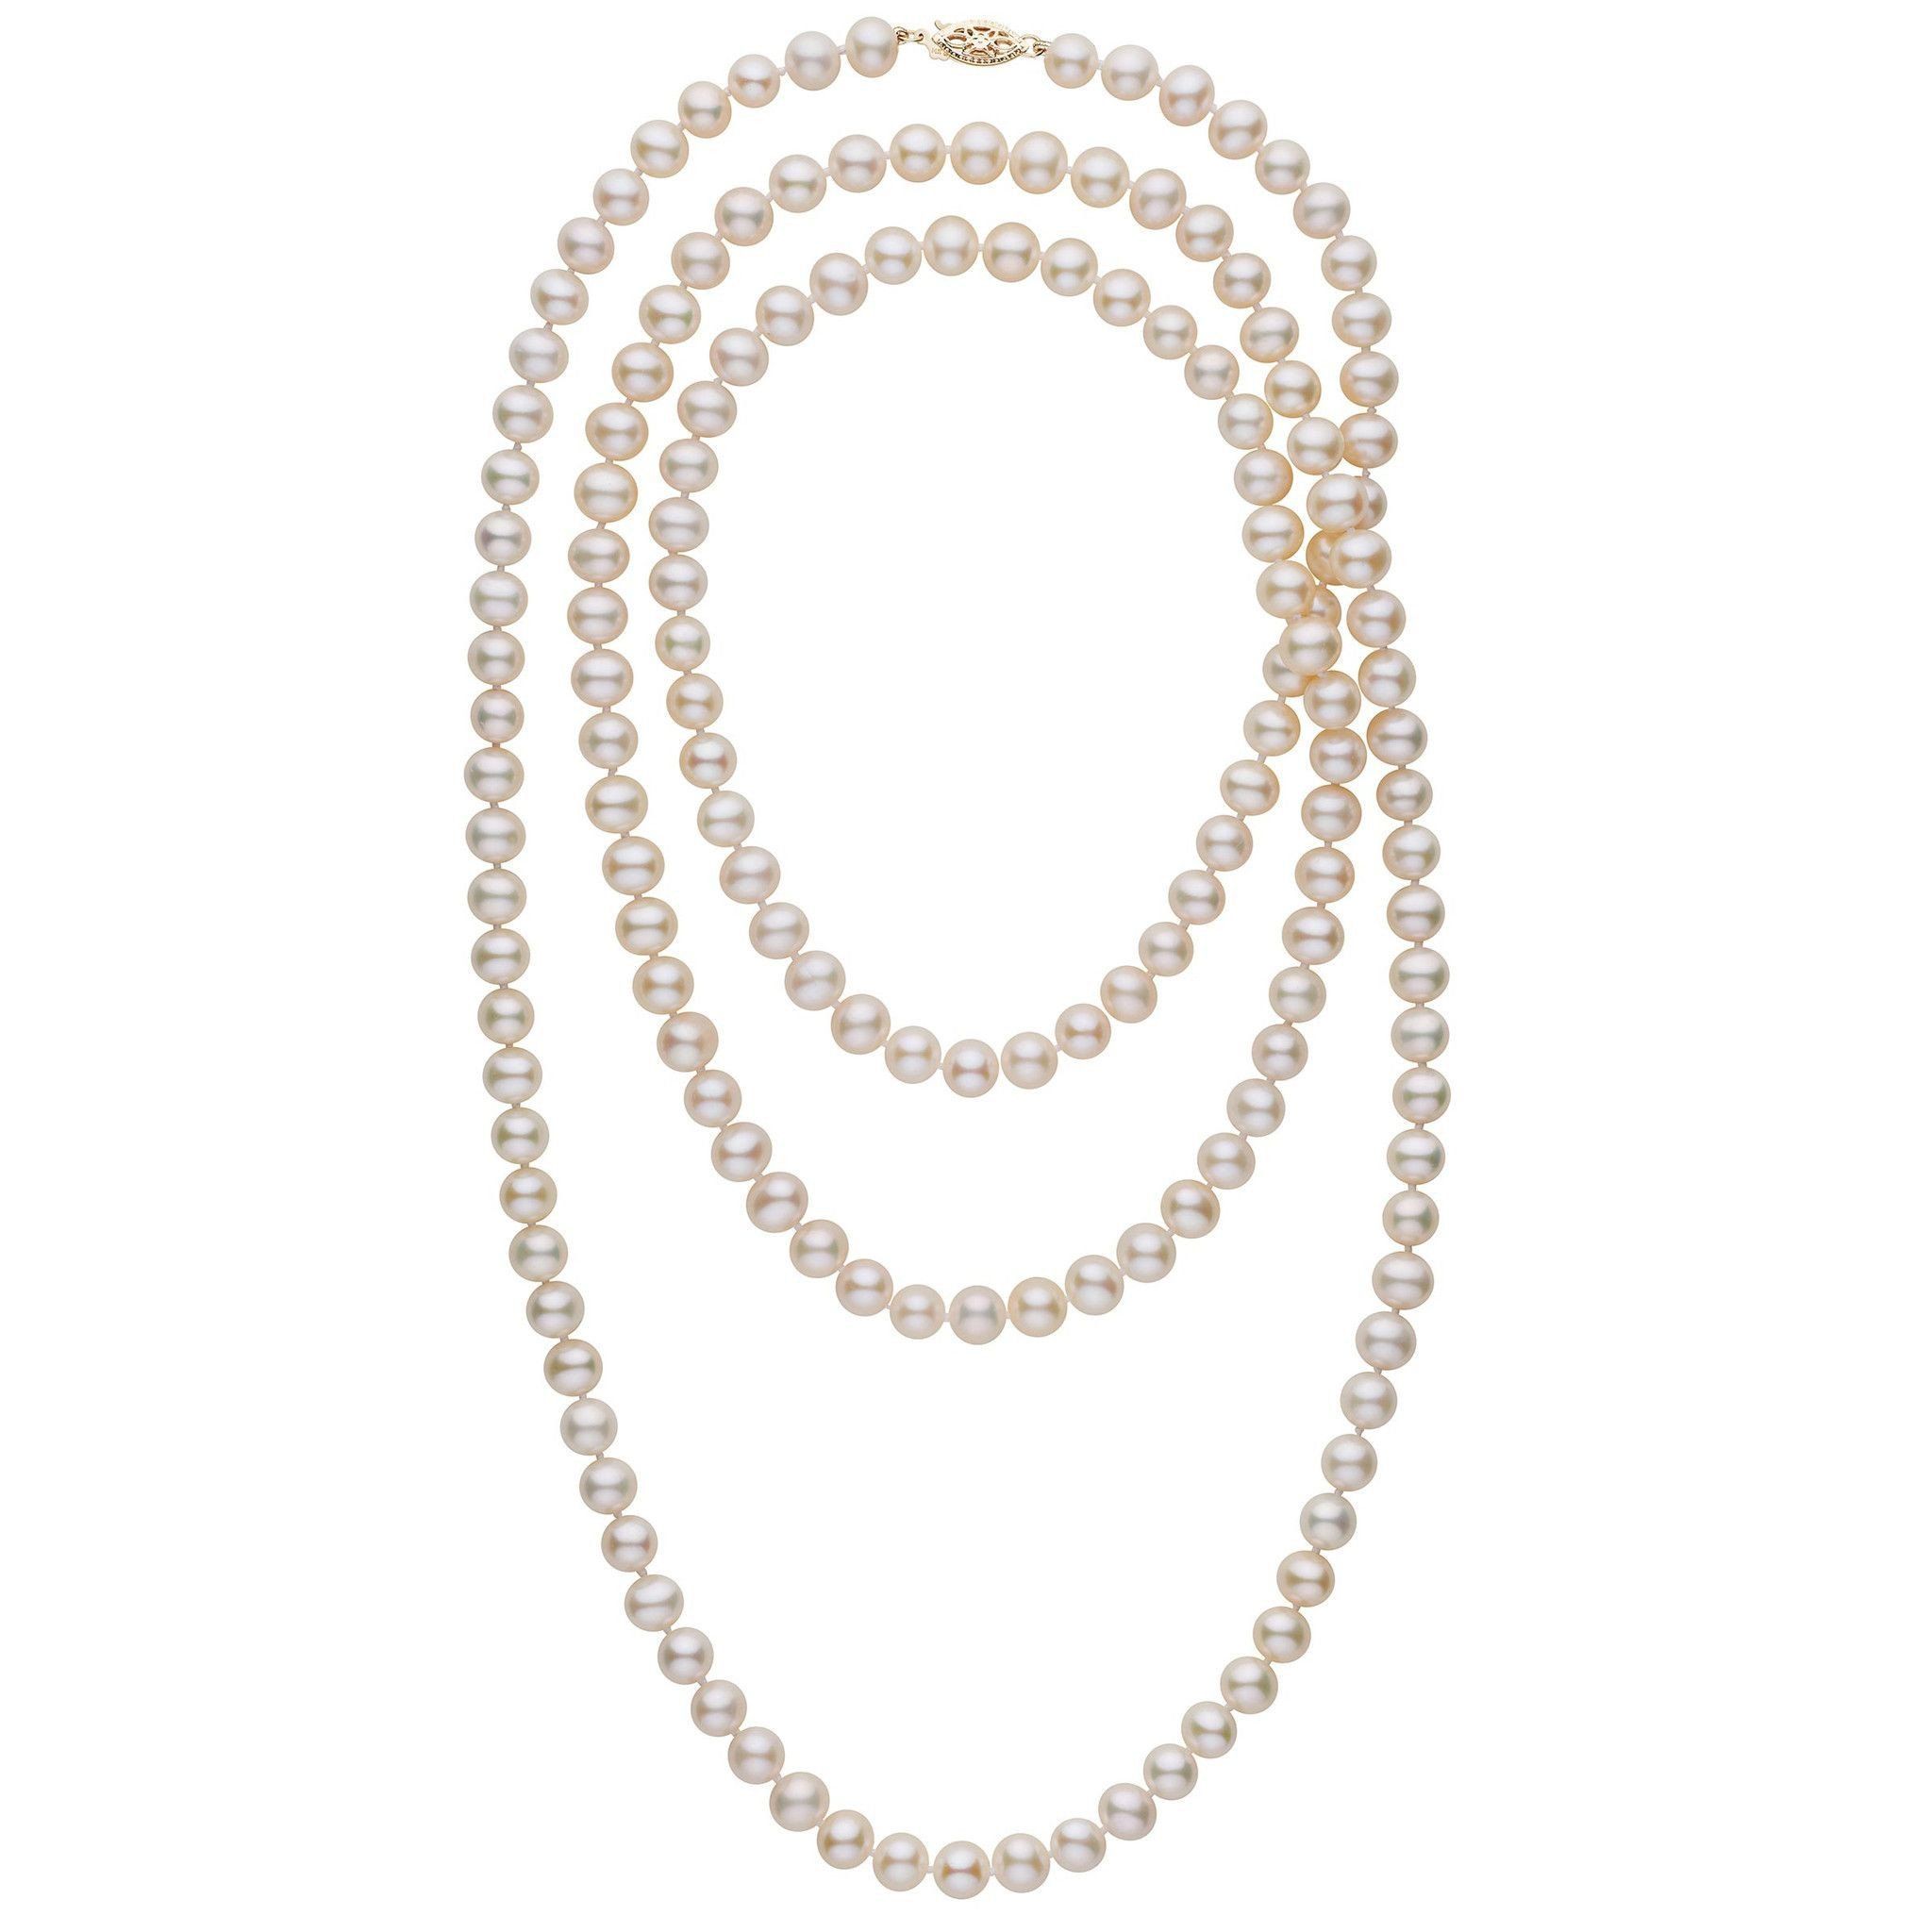 52-inch 7.5-8.0 mm AA+ White Freshwater Pearl Necklace